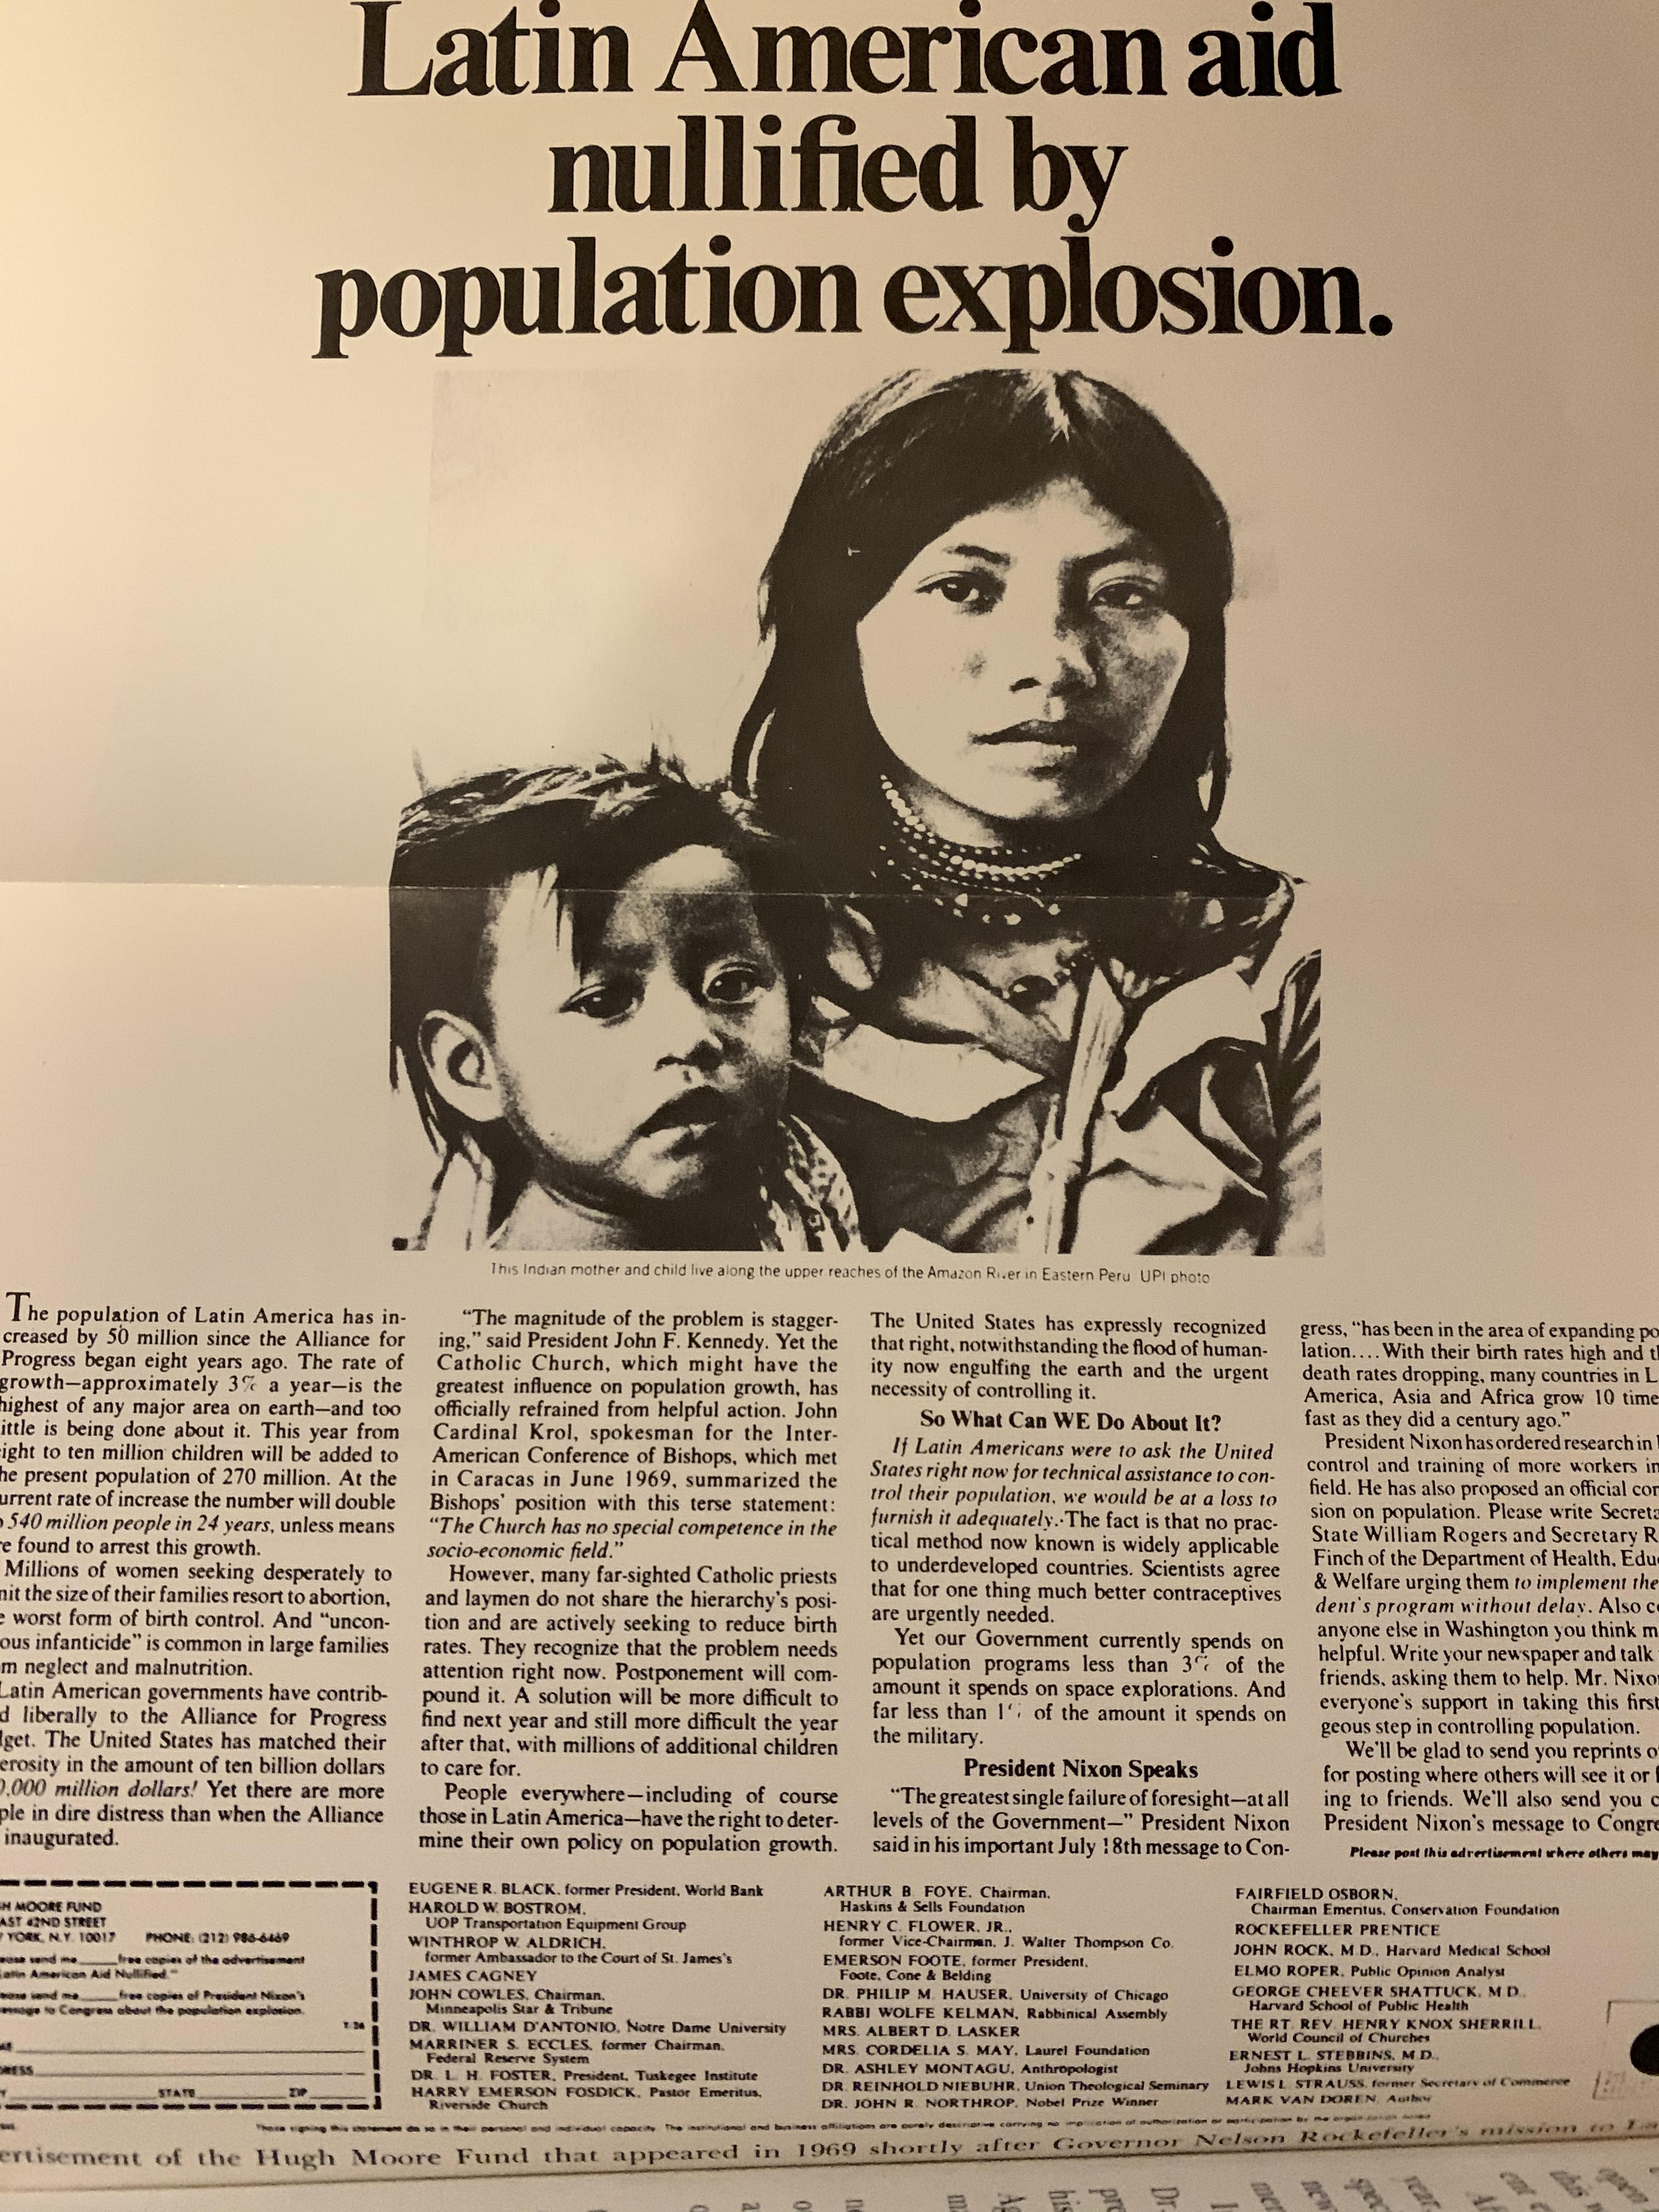 Image: Hugh Moore Fund 1969 ad signed by Cordilia Scaife May against Lating immigration